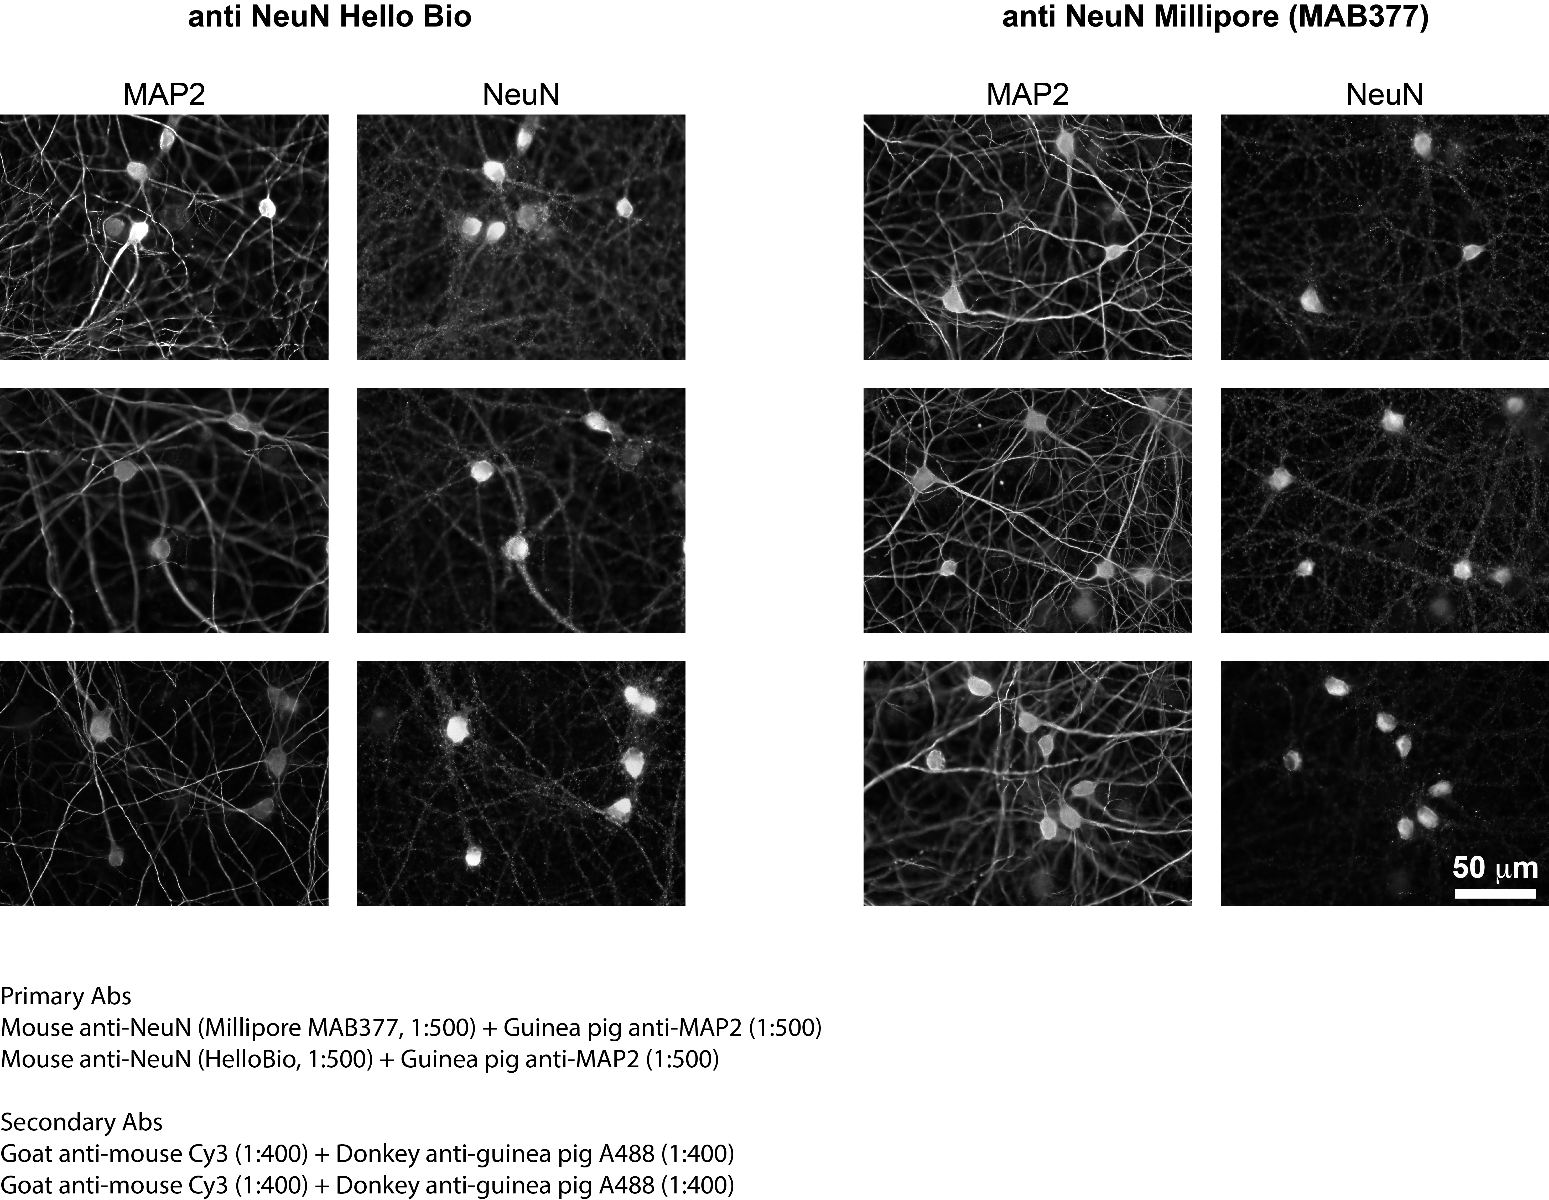 Immunostainings comparing NeuN staining in mouse brain slices